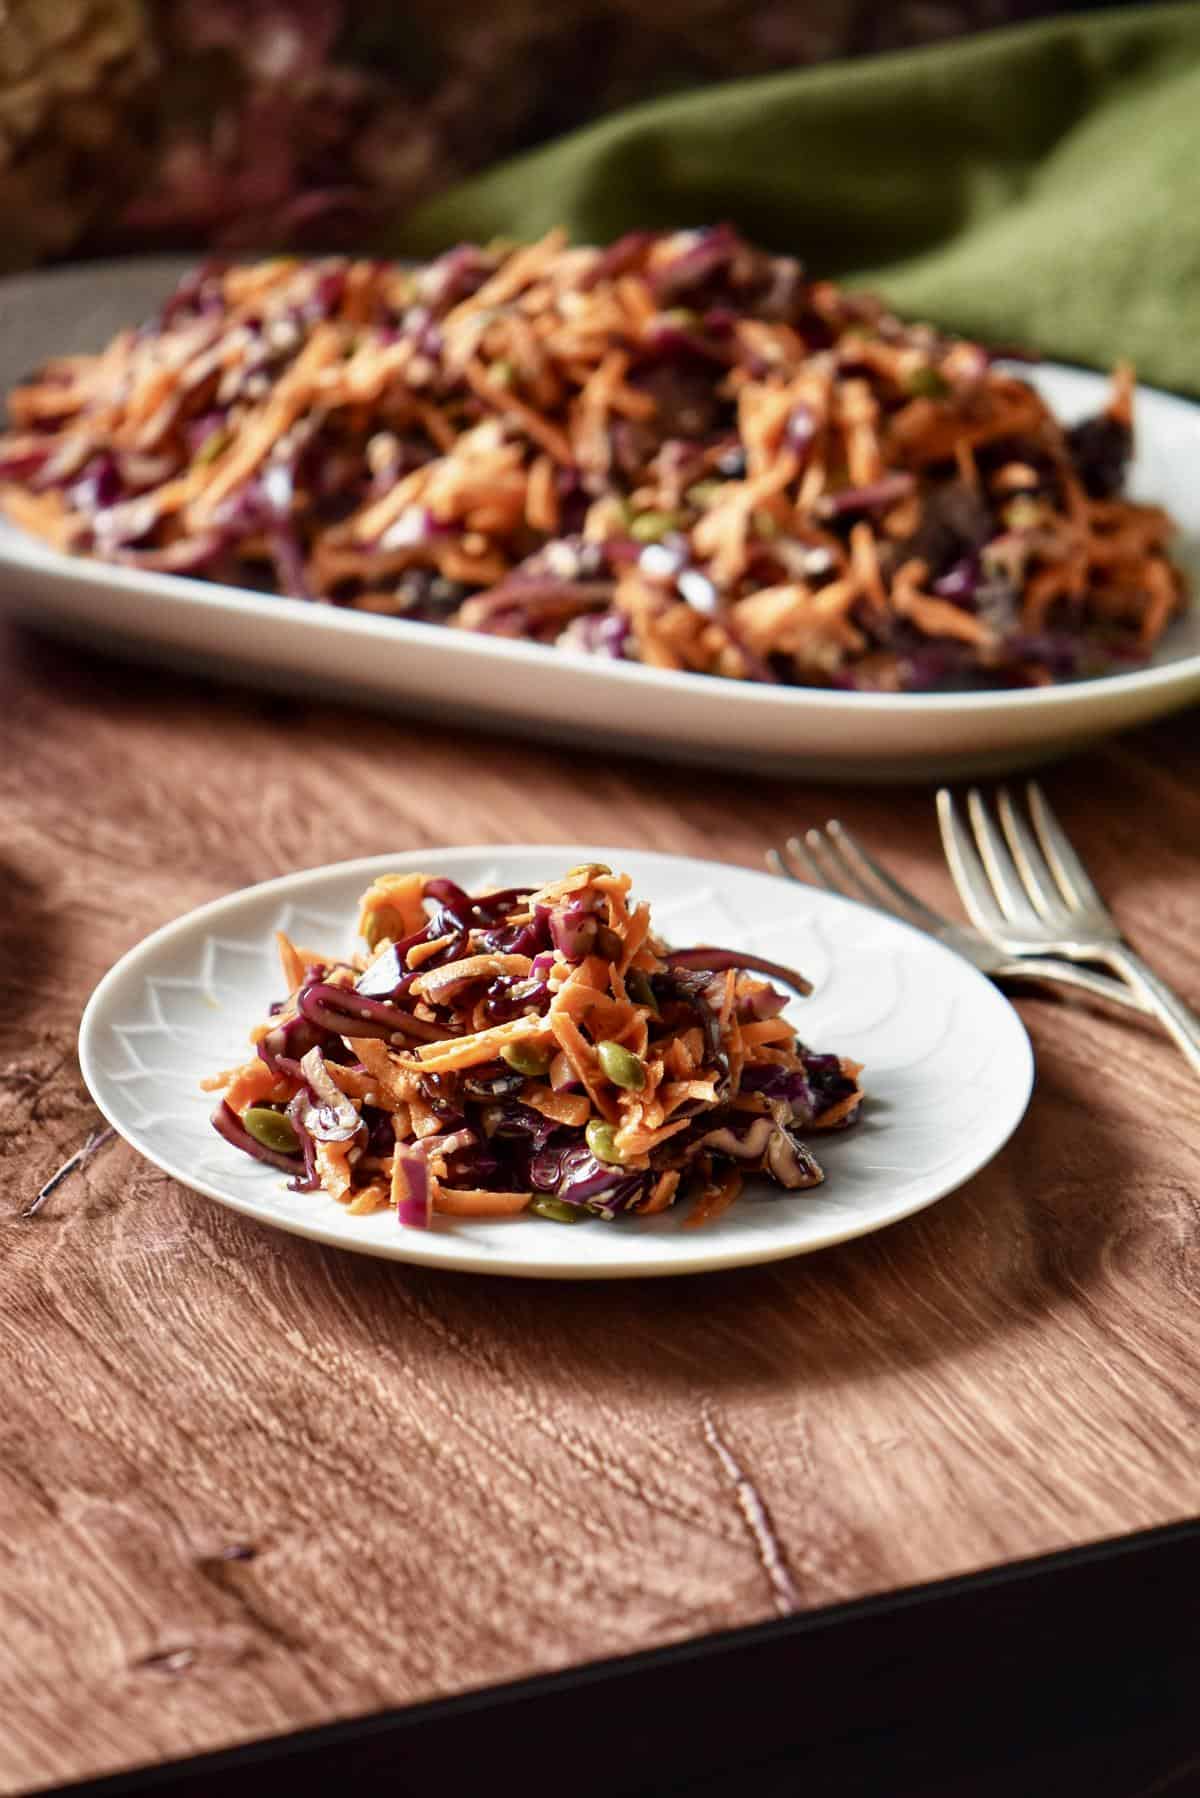 A derving of red cabbage slaw on a white plate.